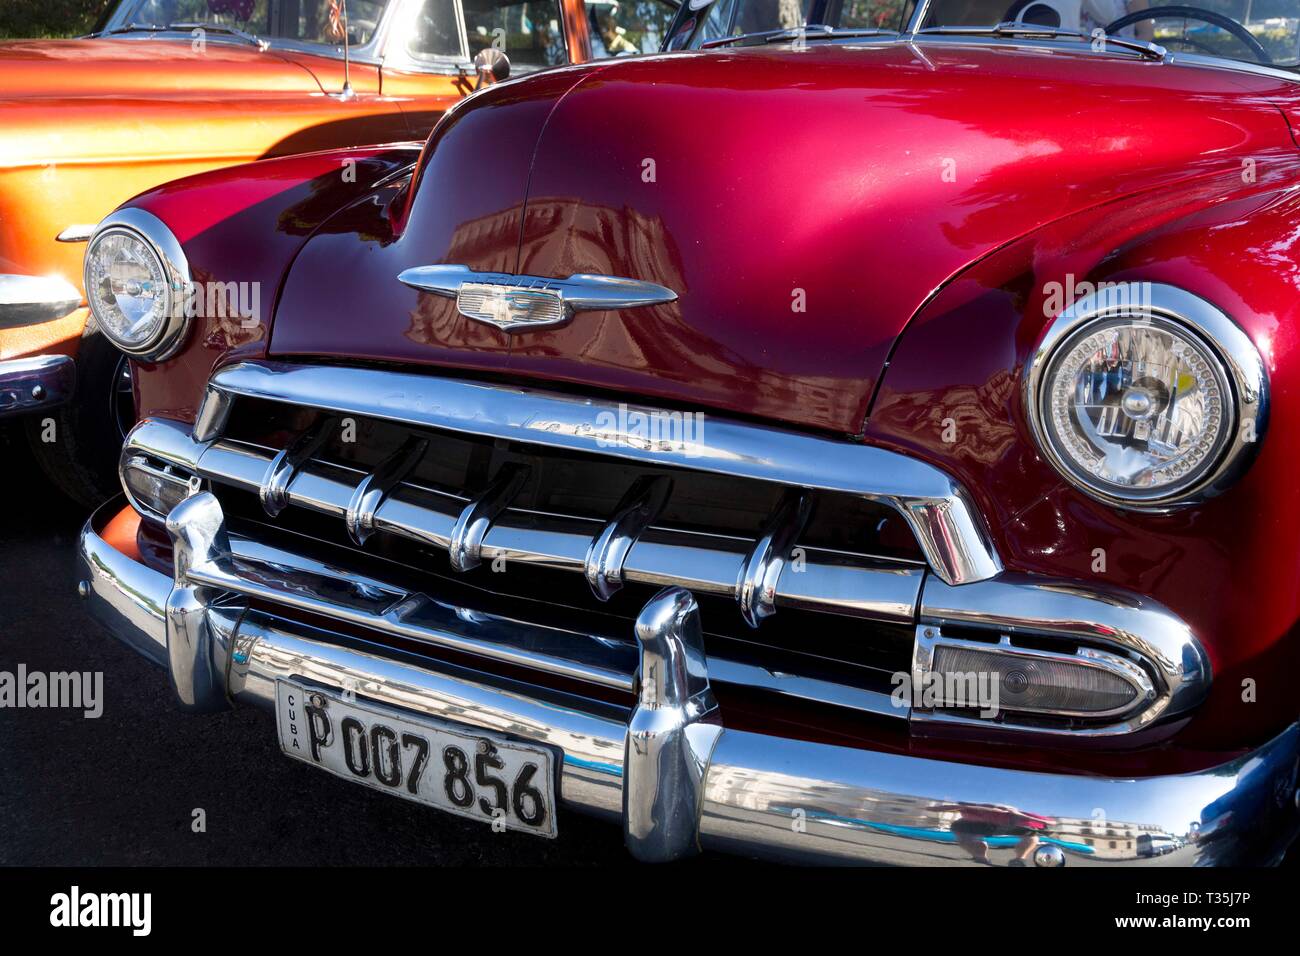 Red 1952 Chevy Convertible parked on Cuba Tacon in Havana, Cuba Stock Photo